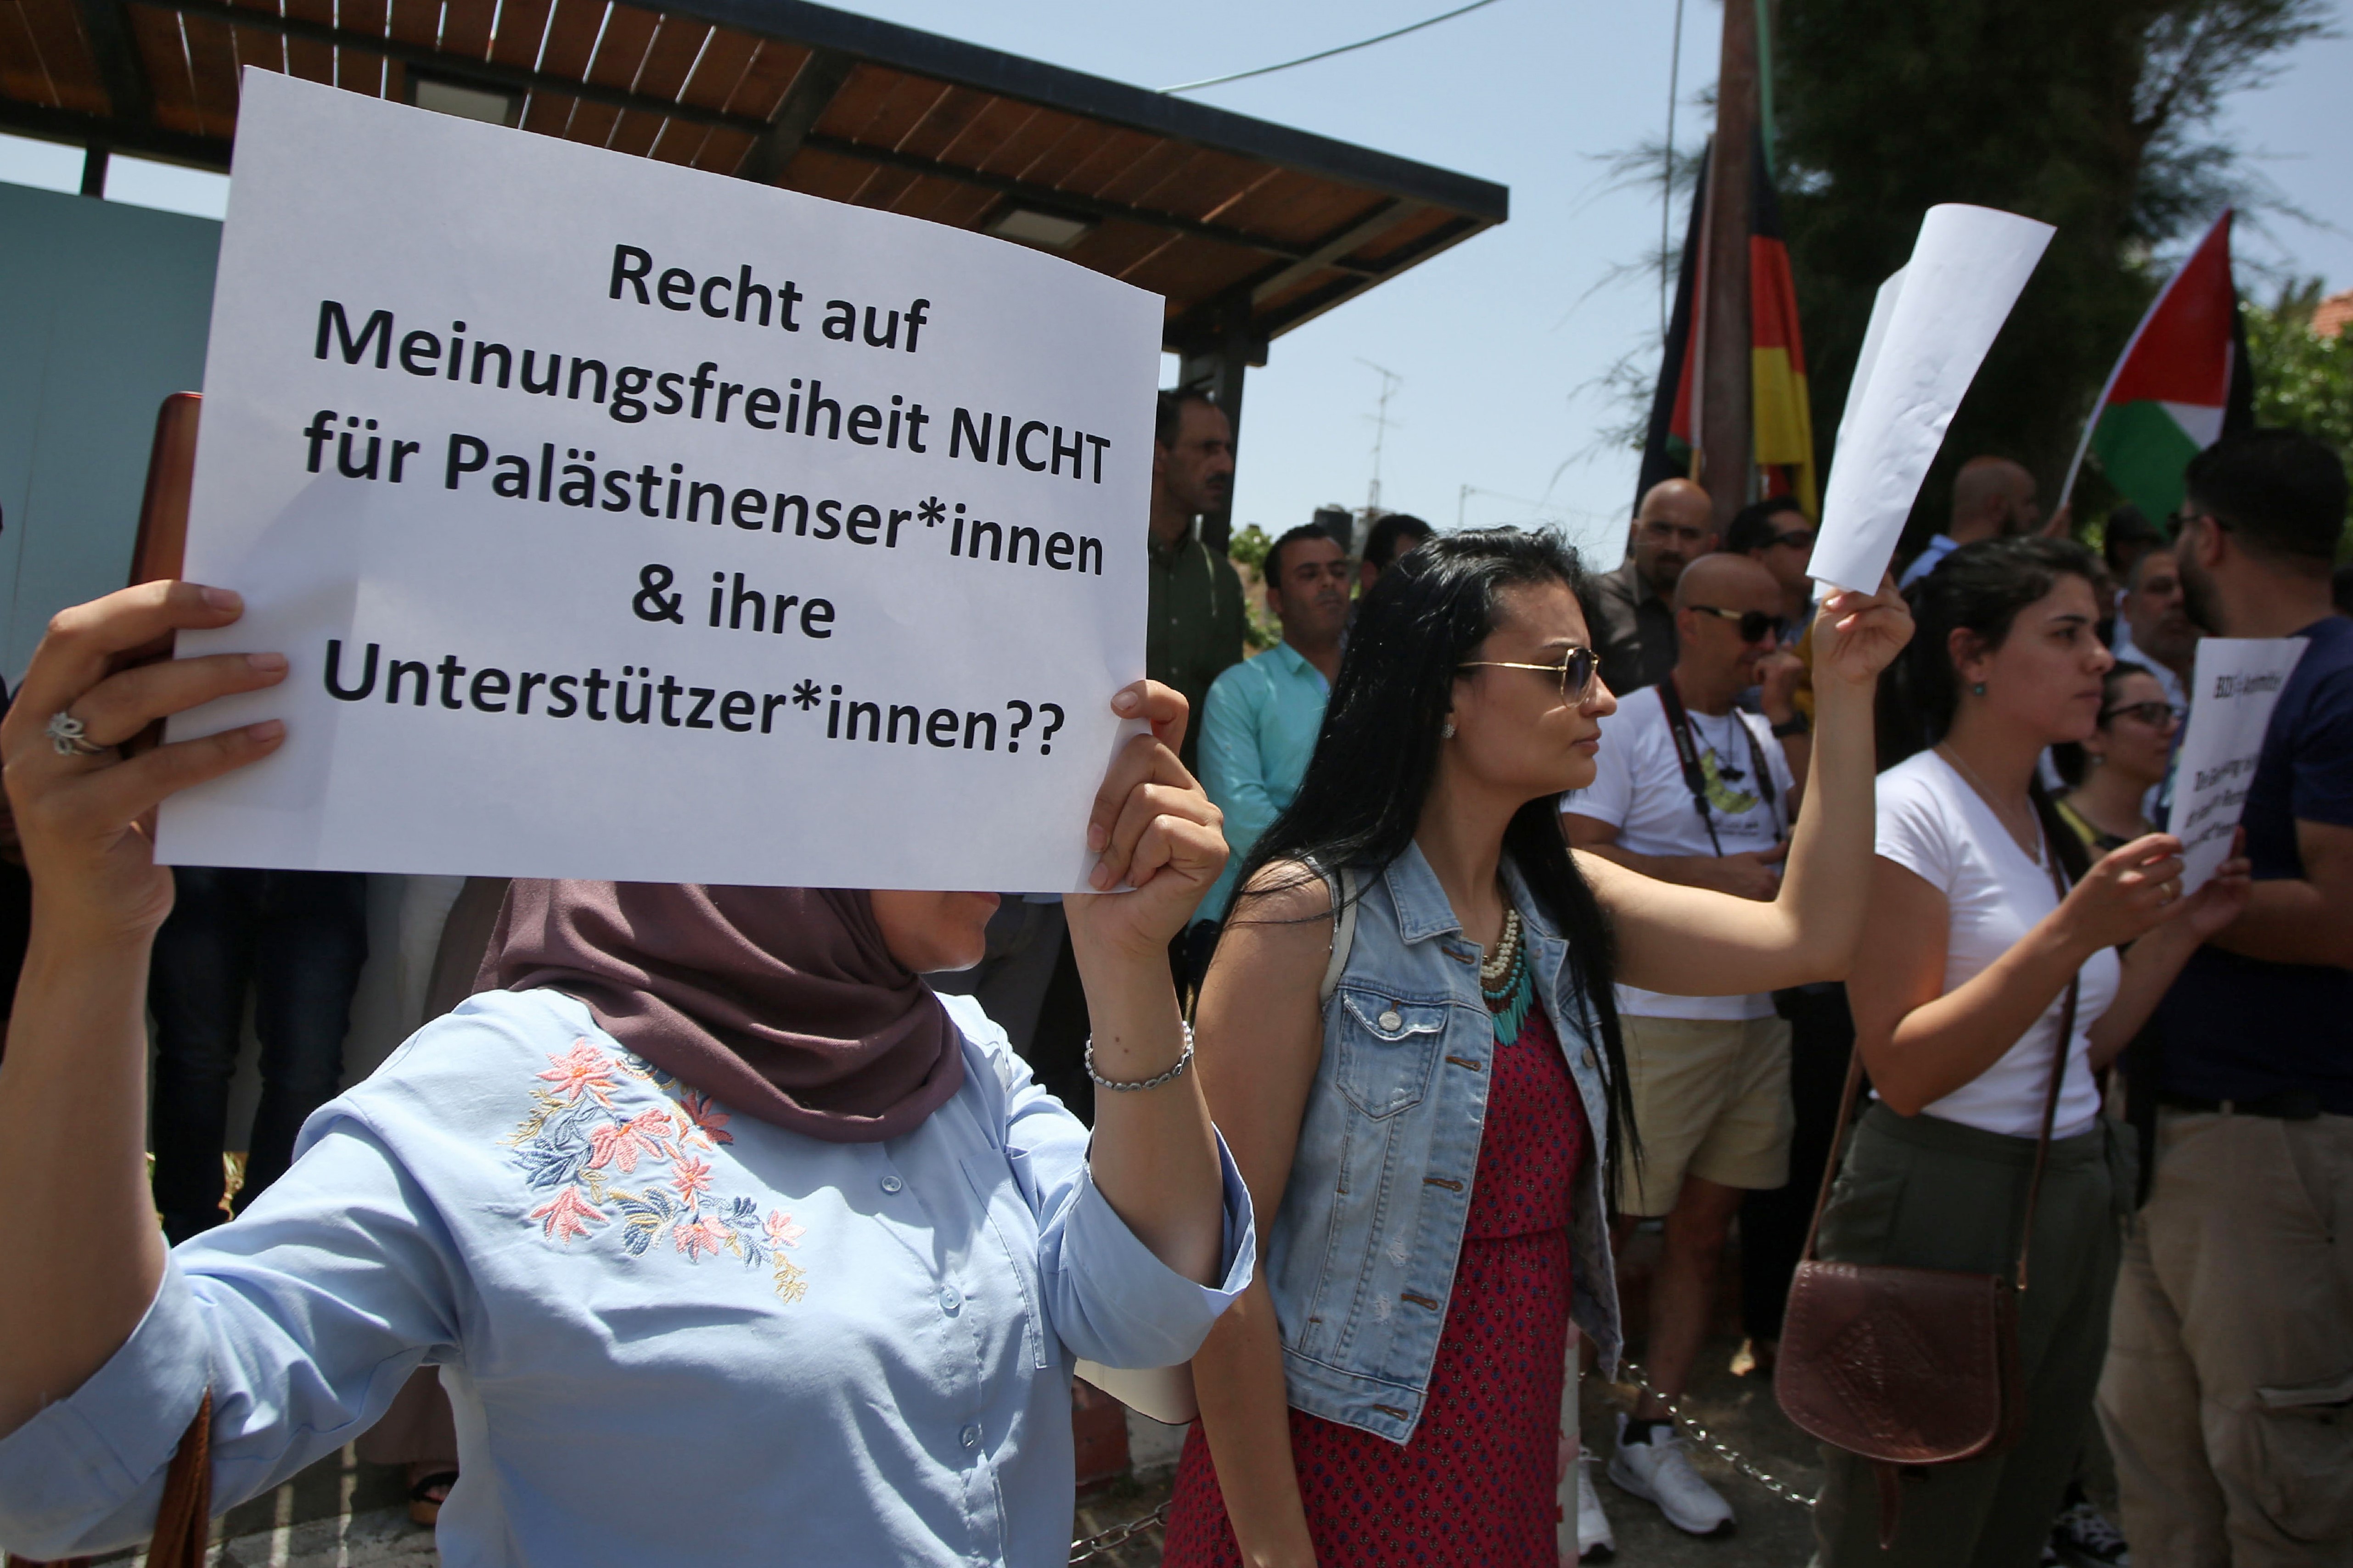 Protesters stage a demonstration outside Germany's Representative Office in Ramallah in the Palestinian West Bank on May 22, 2019, following the Bundestag's (German parliament) condemnation of the Boycott, Divestment, Sanctions (BDS) movement as anti-Semitic.